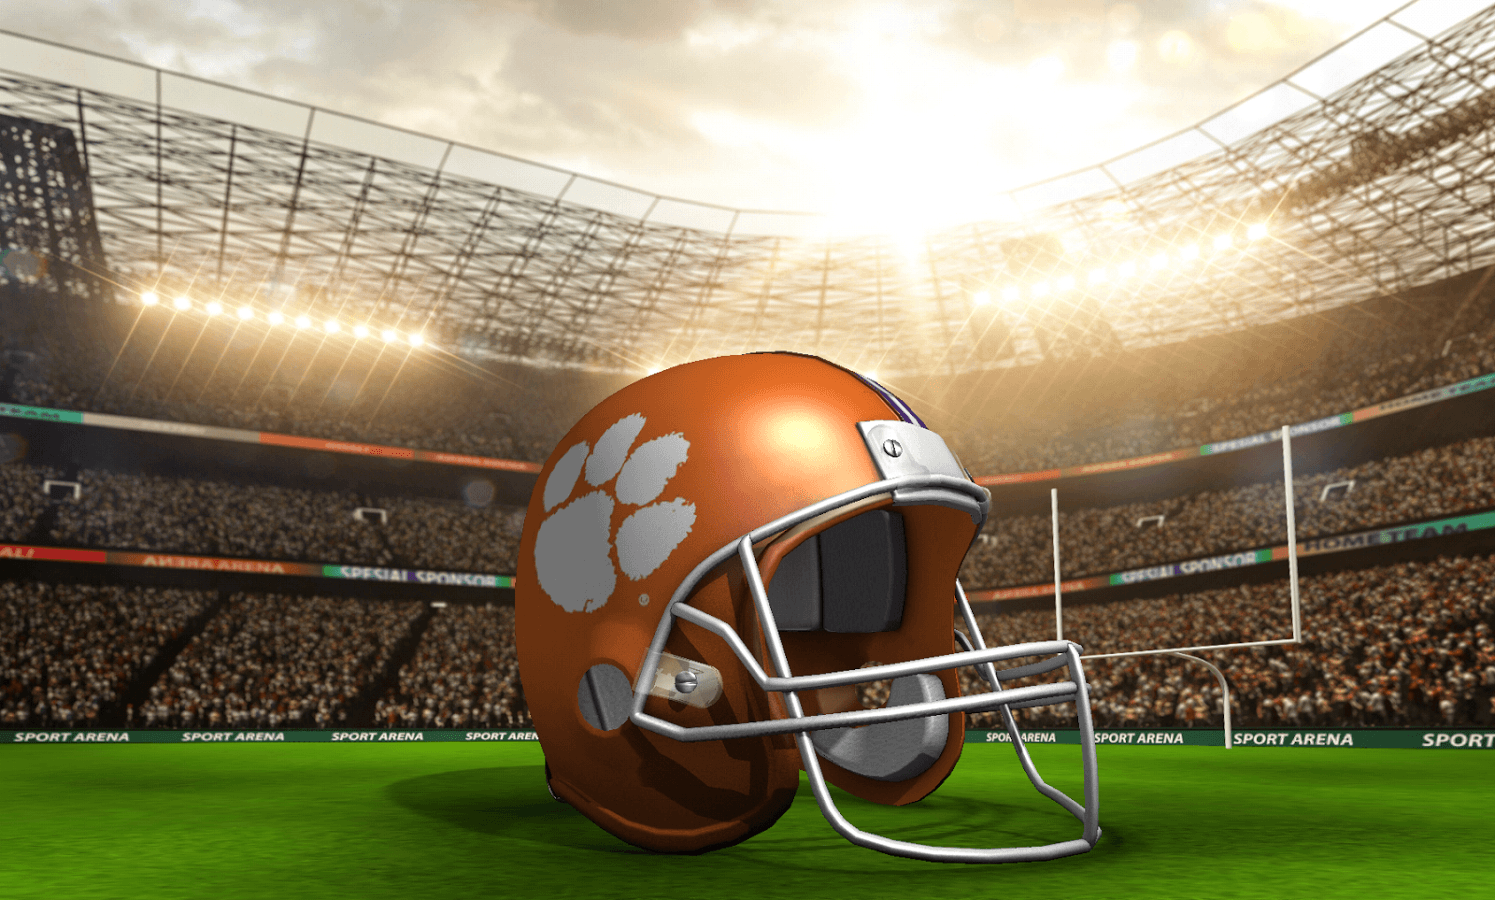 Clemson Tigers Live Wallpaper Apps on Google Play